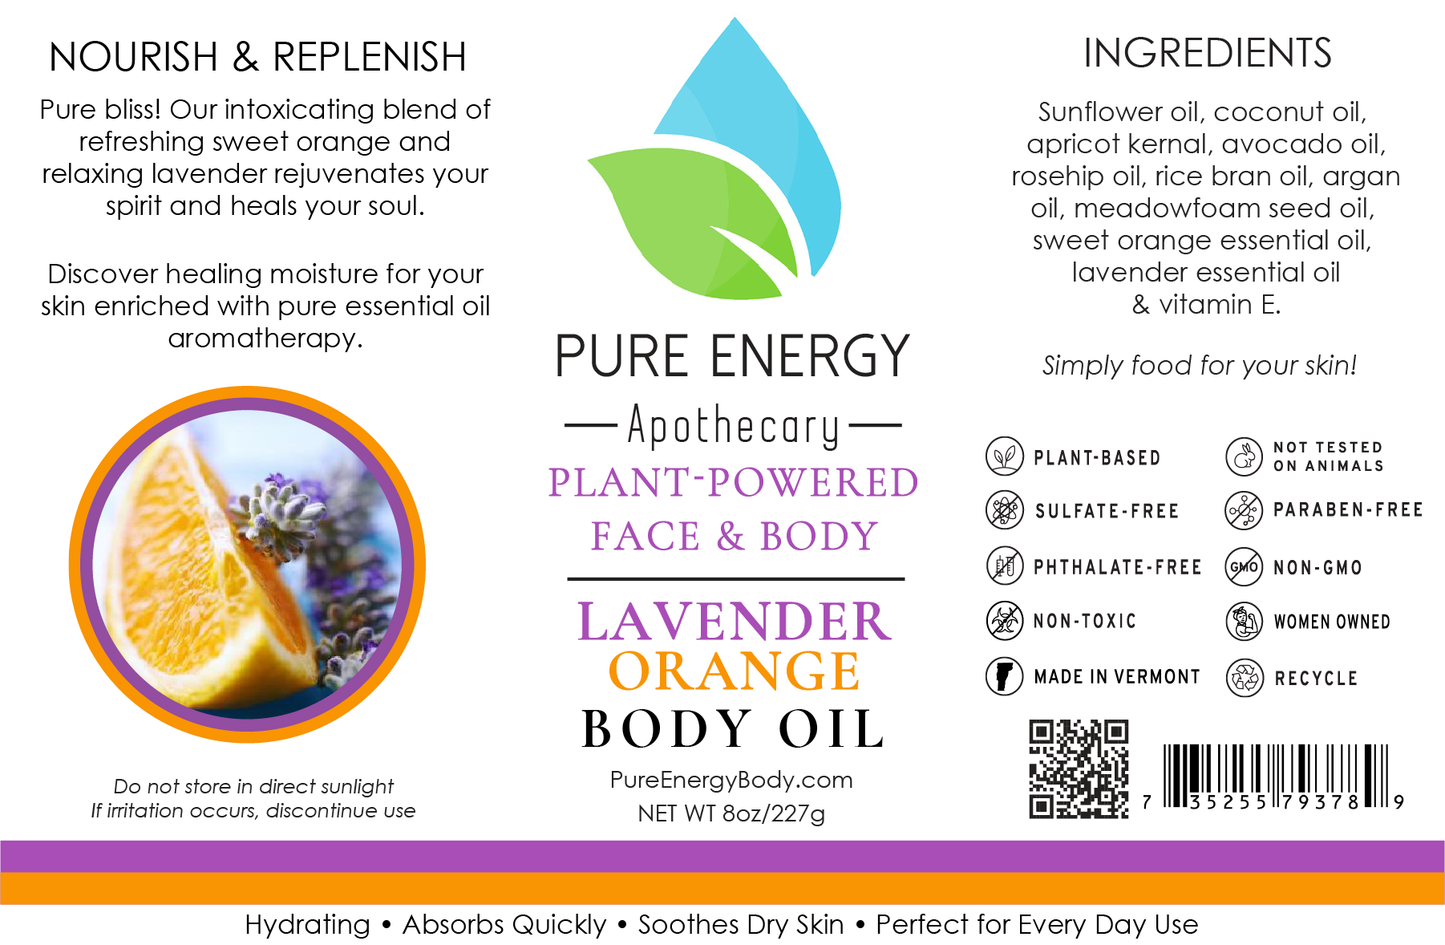 Skin Oil (Lavender Orange) by Pure Energy Apothecary